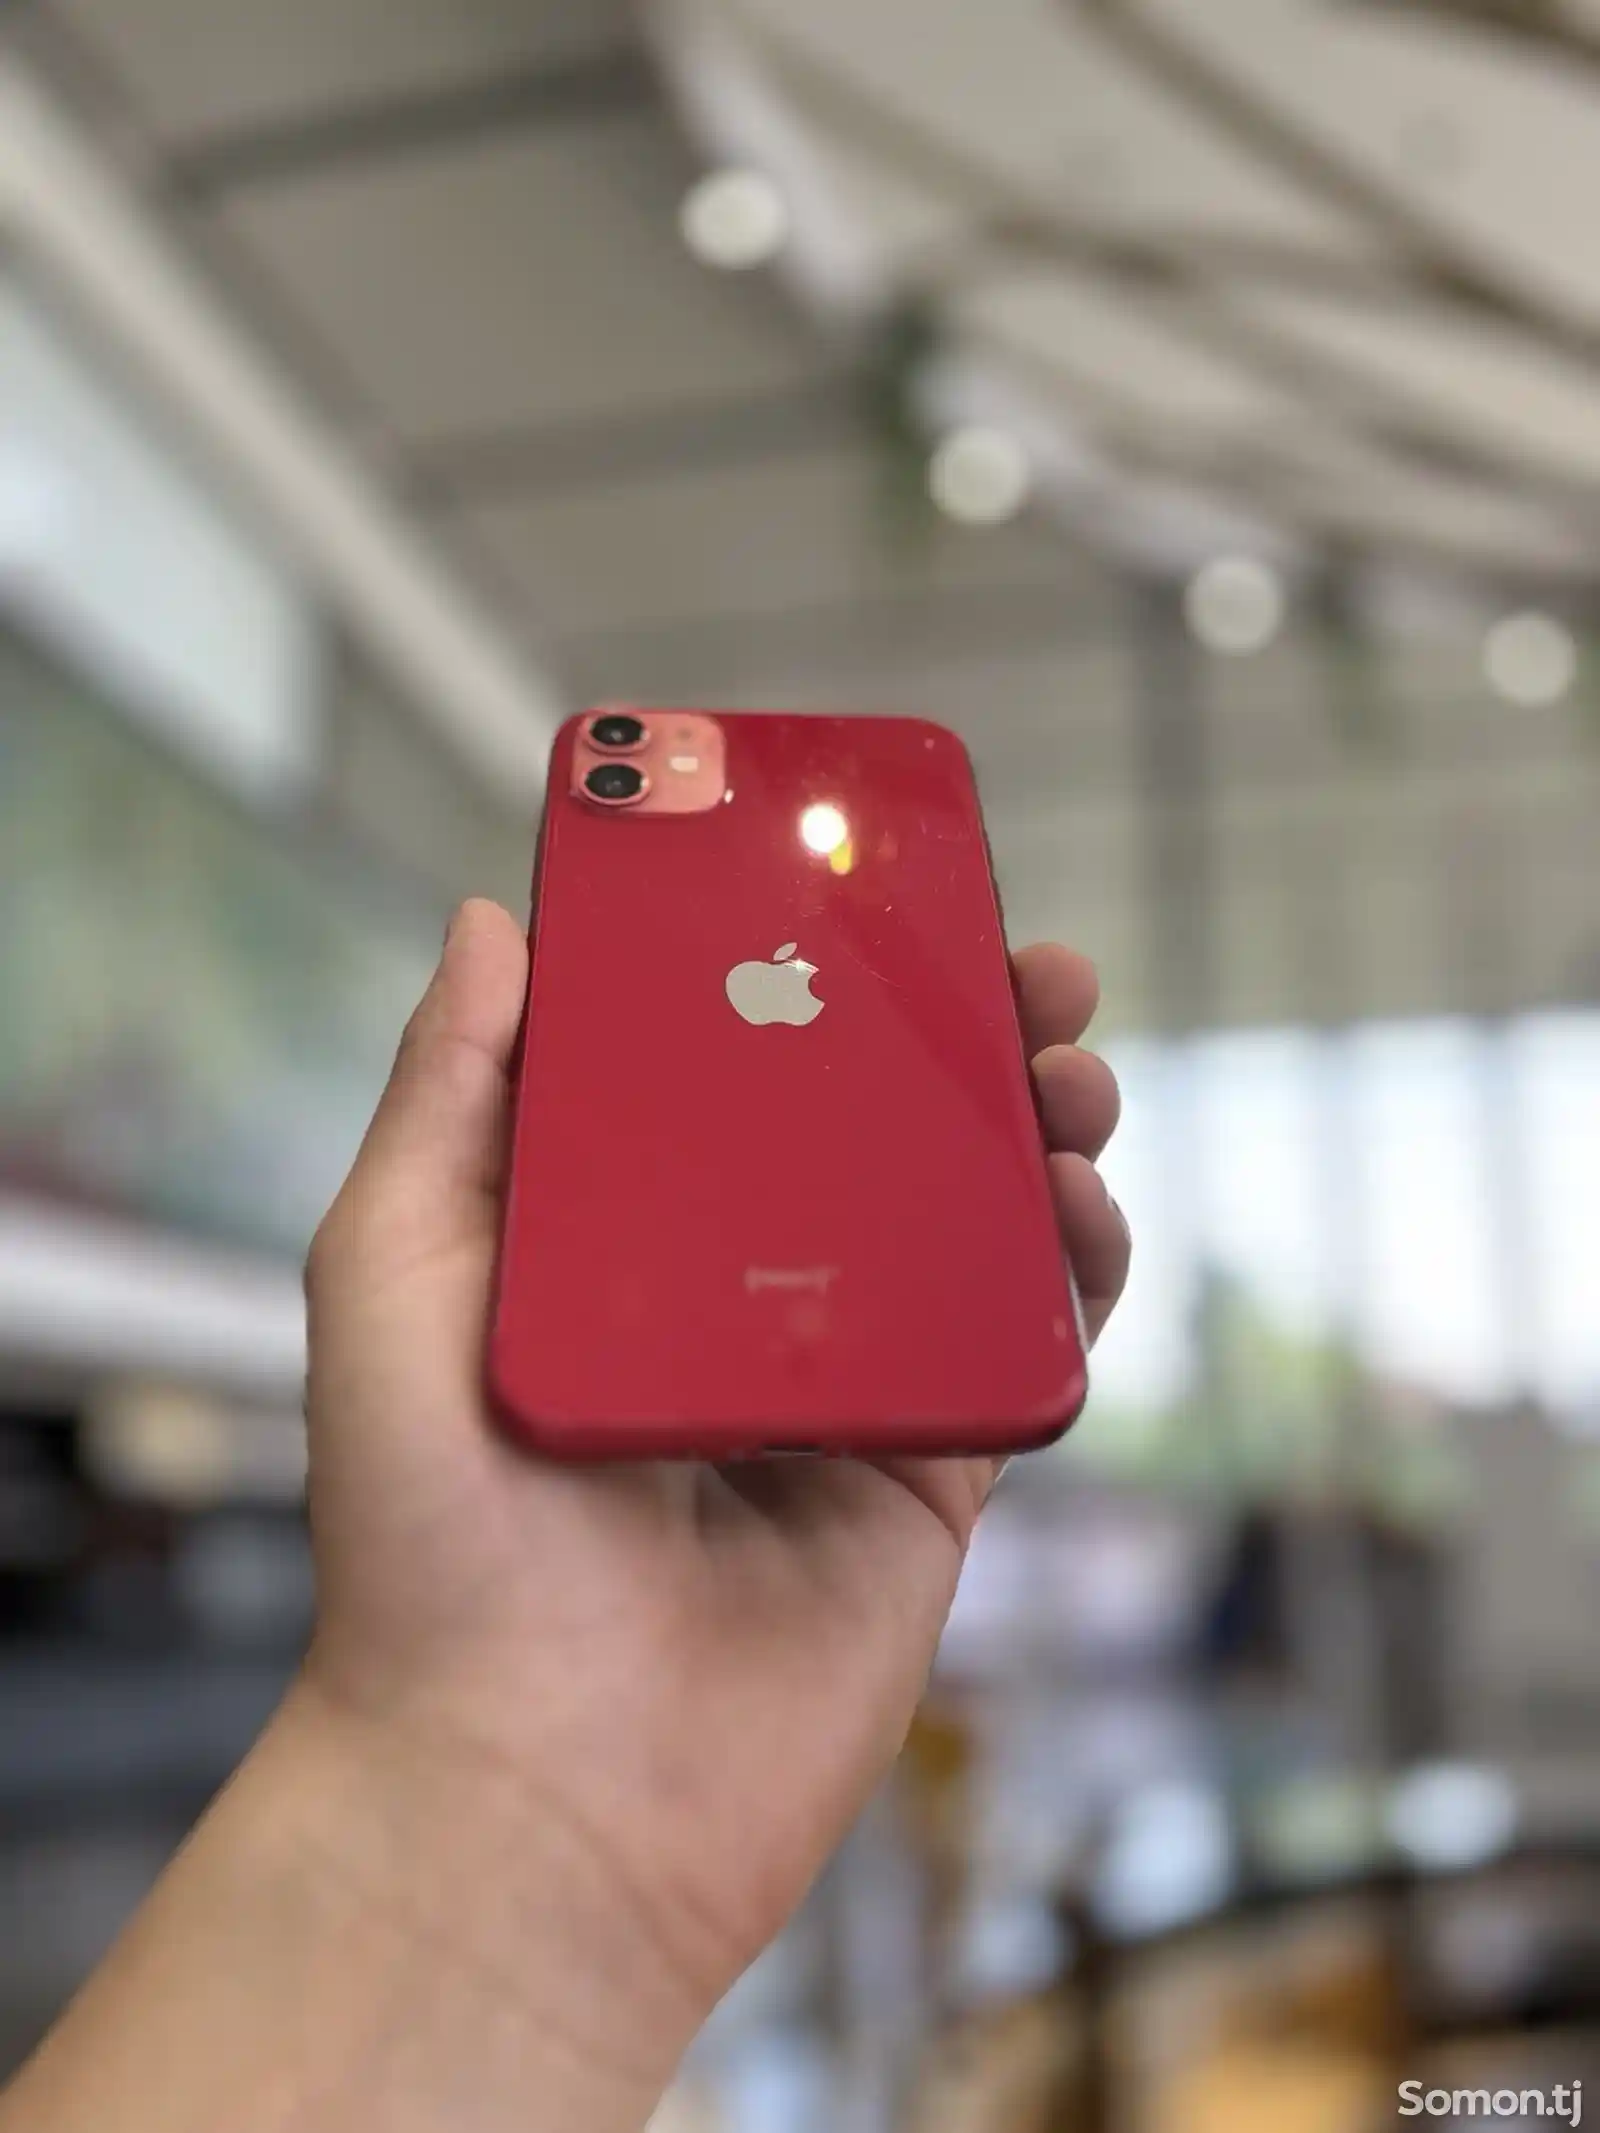 Apple iPhone 11, 64 gb, Product Red-4